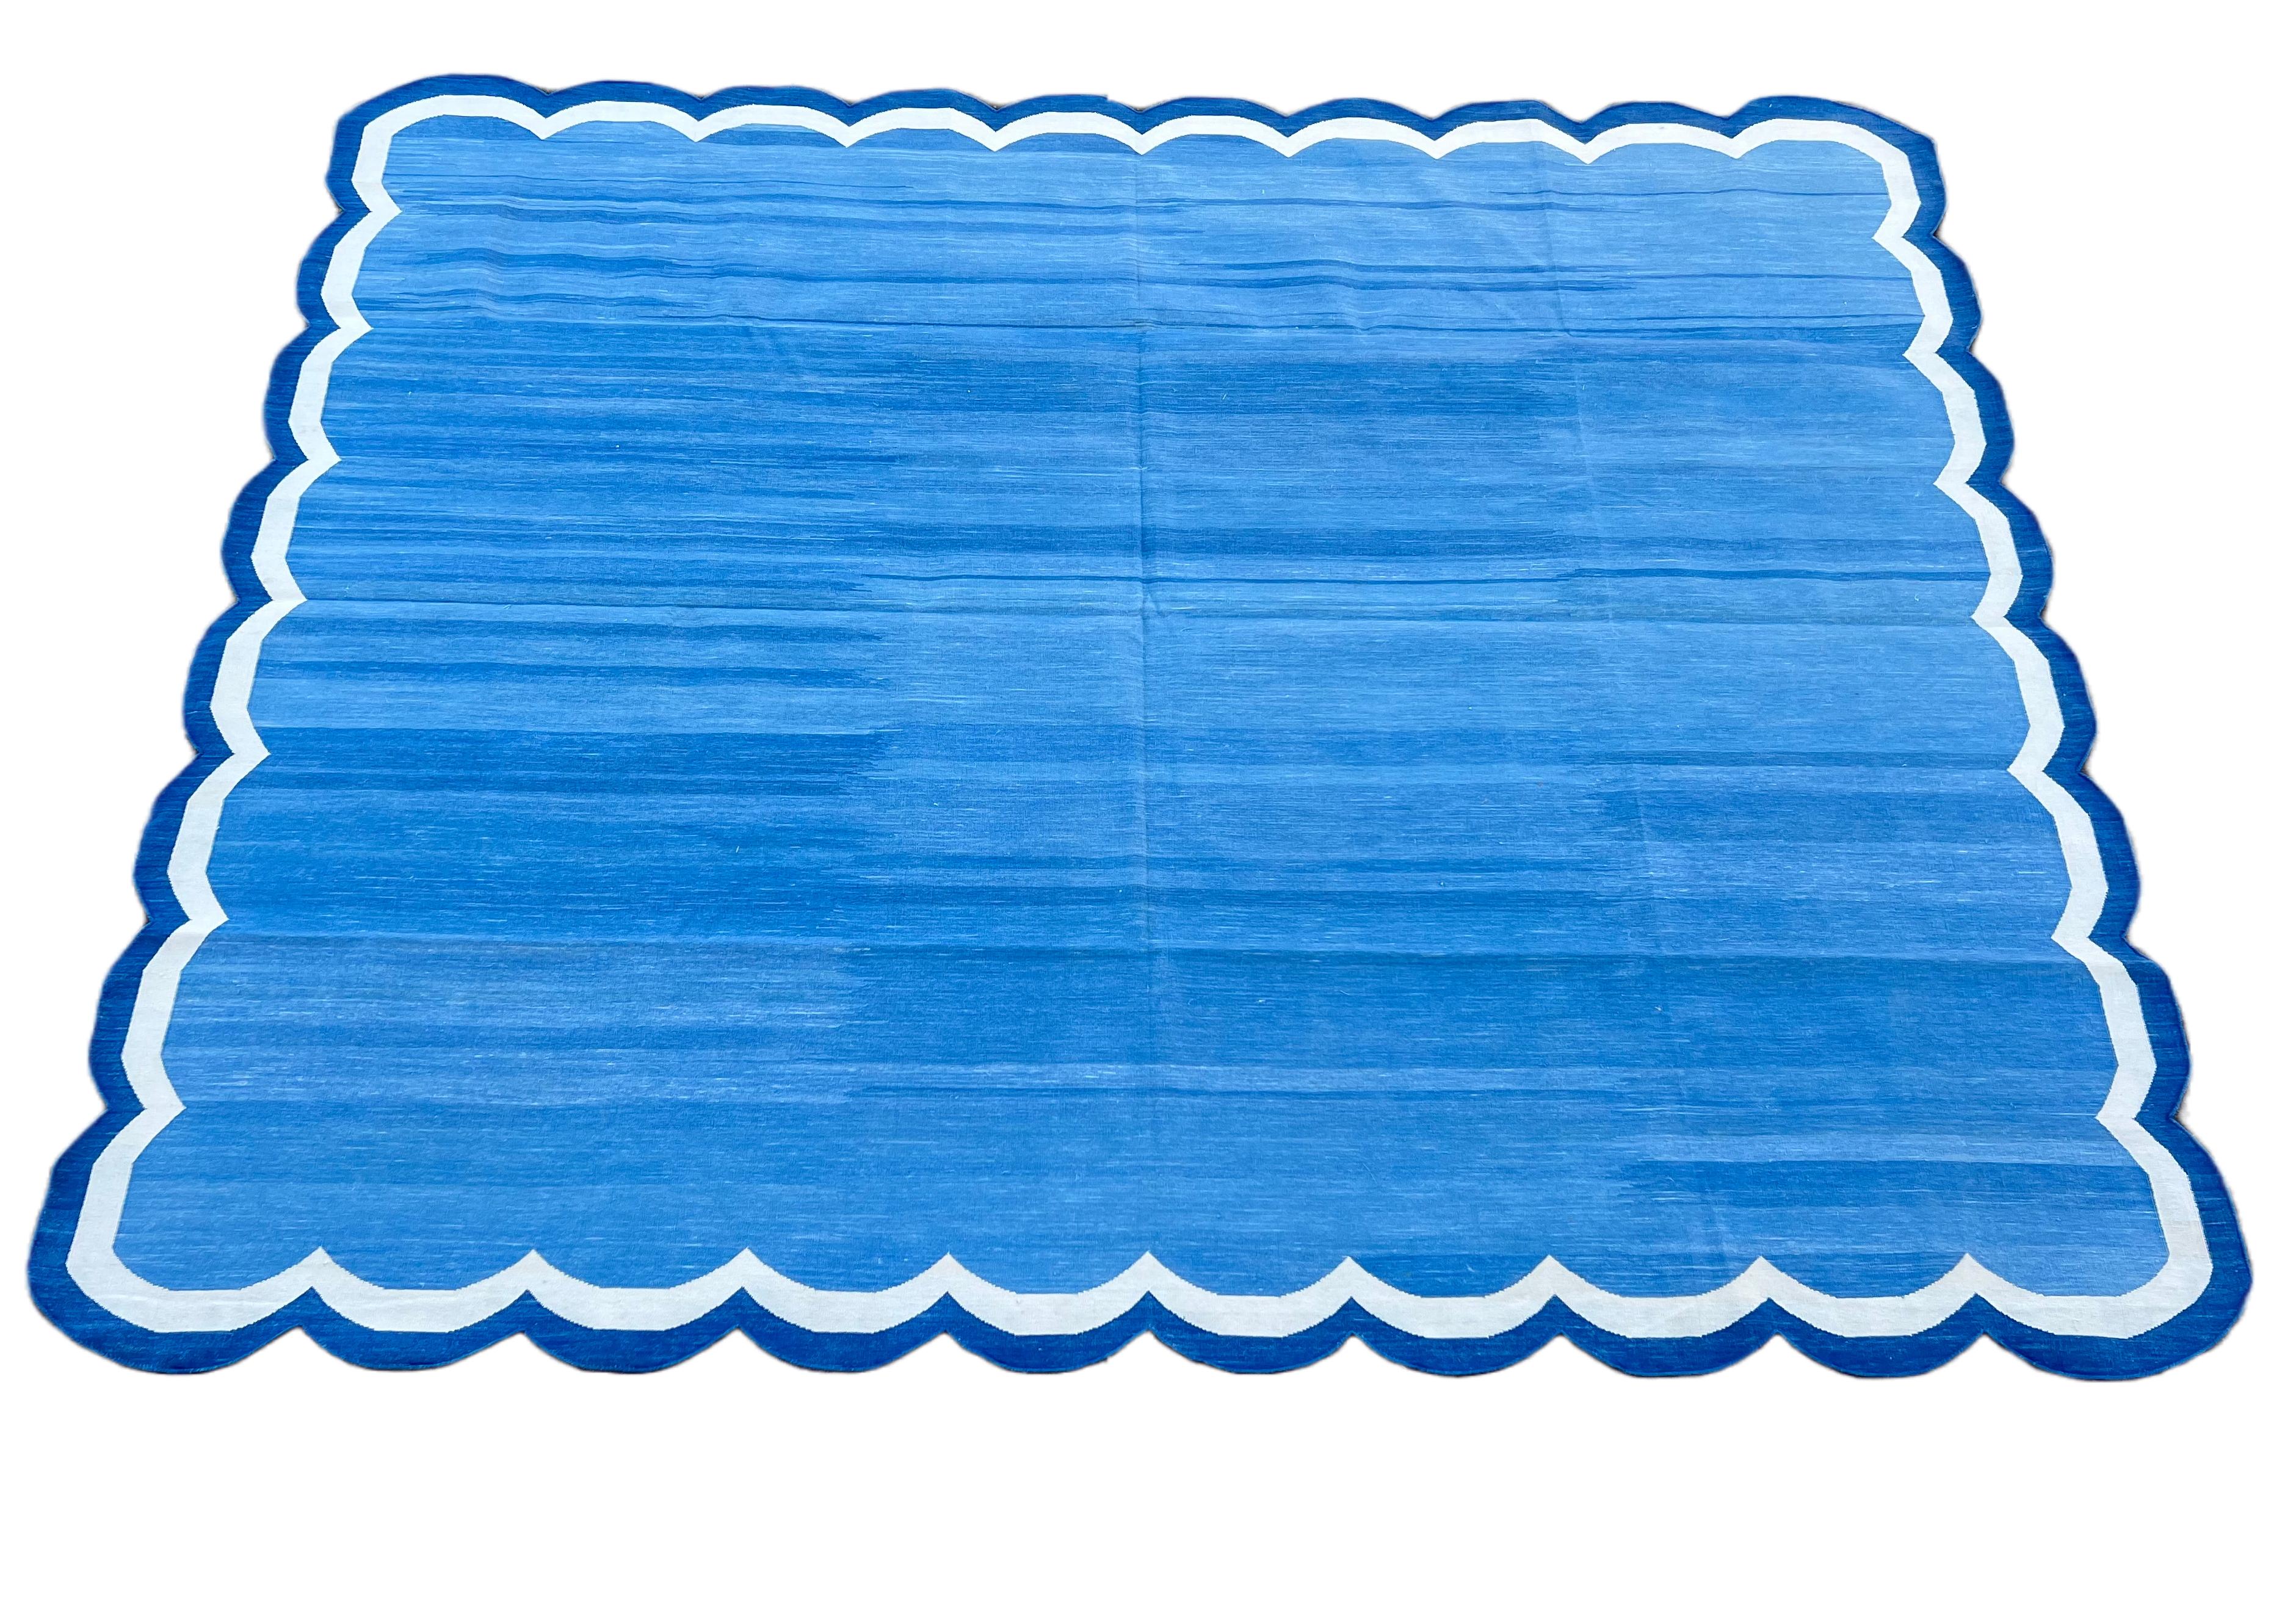 Handmade Cotton Area Flat Weave Rug, Indigo Blue & White Scallop Indian Dhurrie For Sale 5